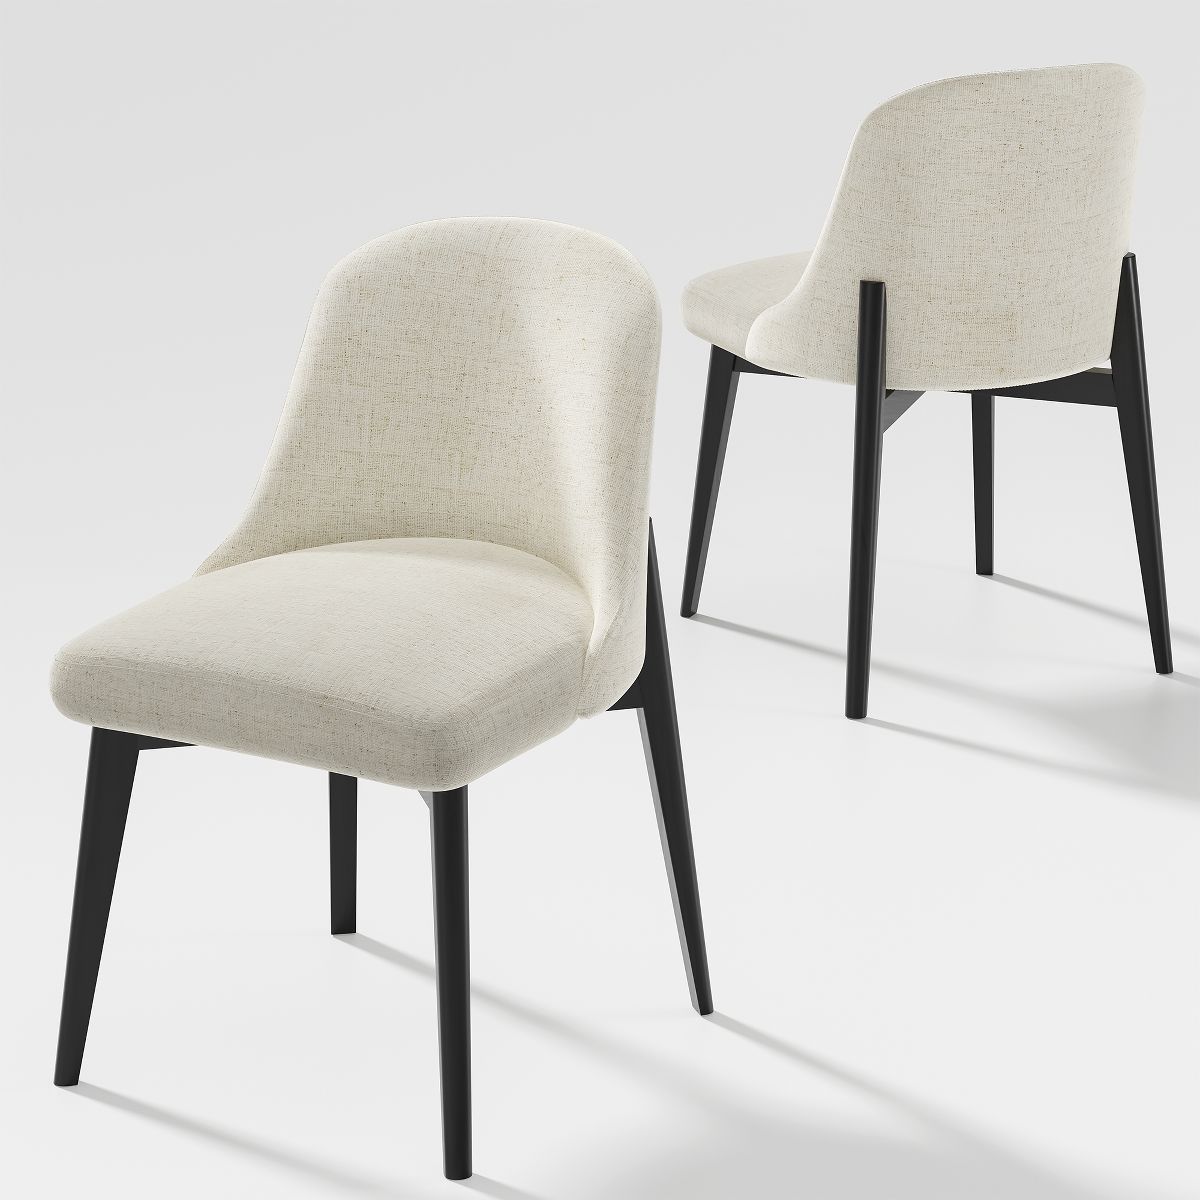 Neutypechic Modern Dining Chair with Upholstery and Wooden Legs (Set of 2) | Target